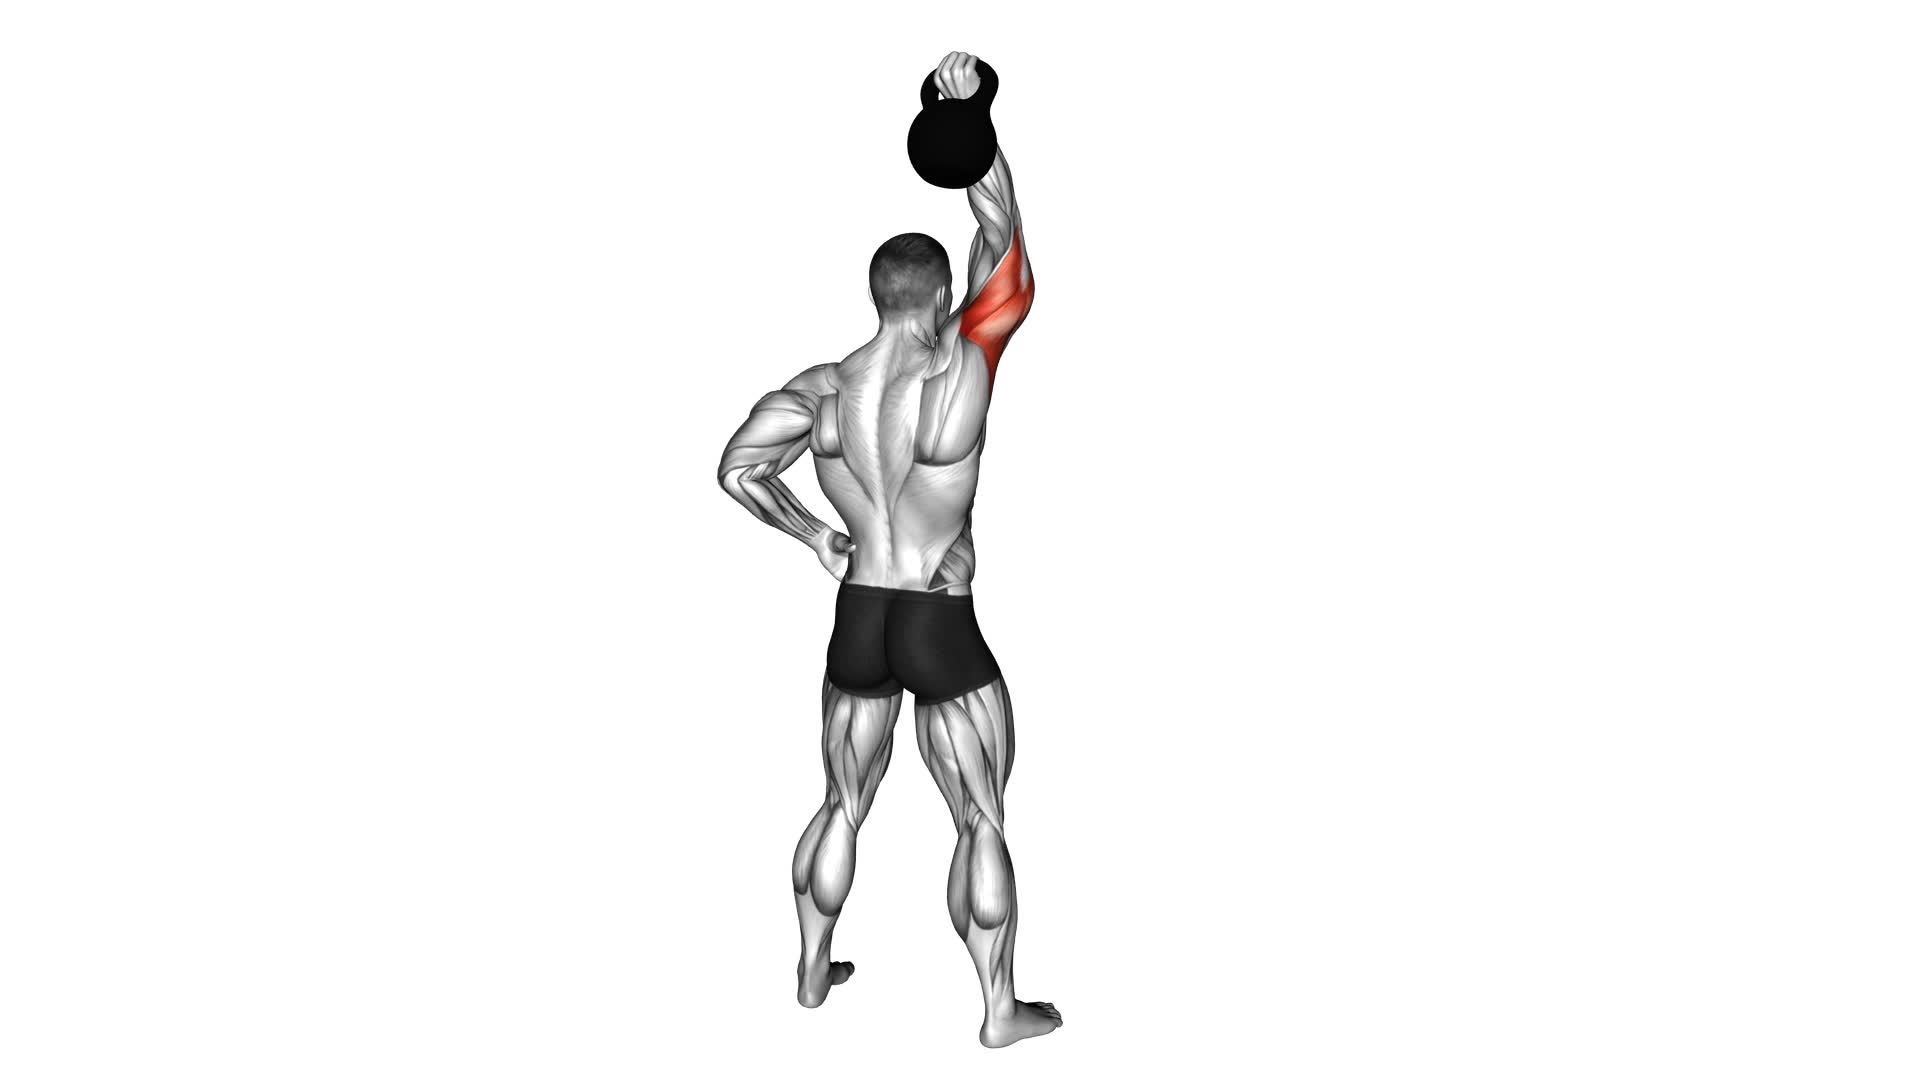 Kettlebell Standing One Arm Extension - Video Exercise Guide & Tips